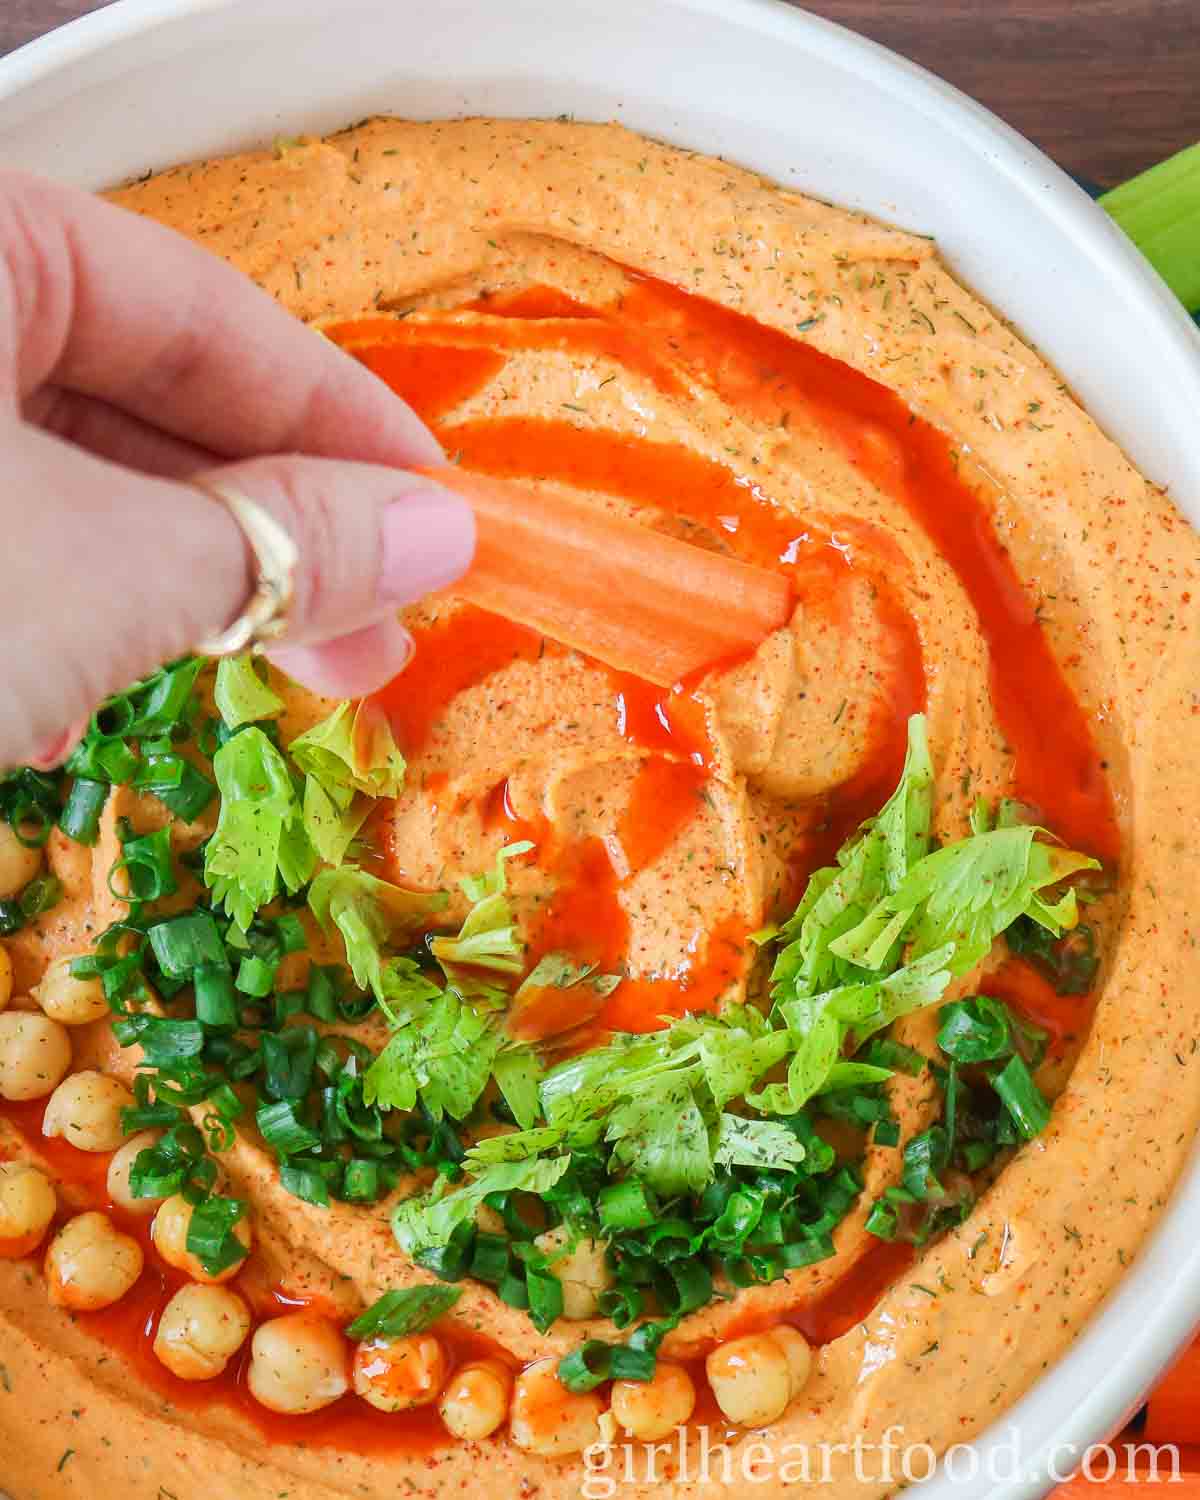 Hand dipping a carrot stick into a bowl of buffalo hummus.